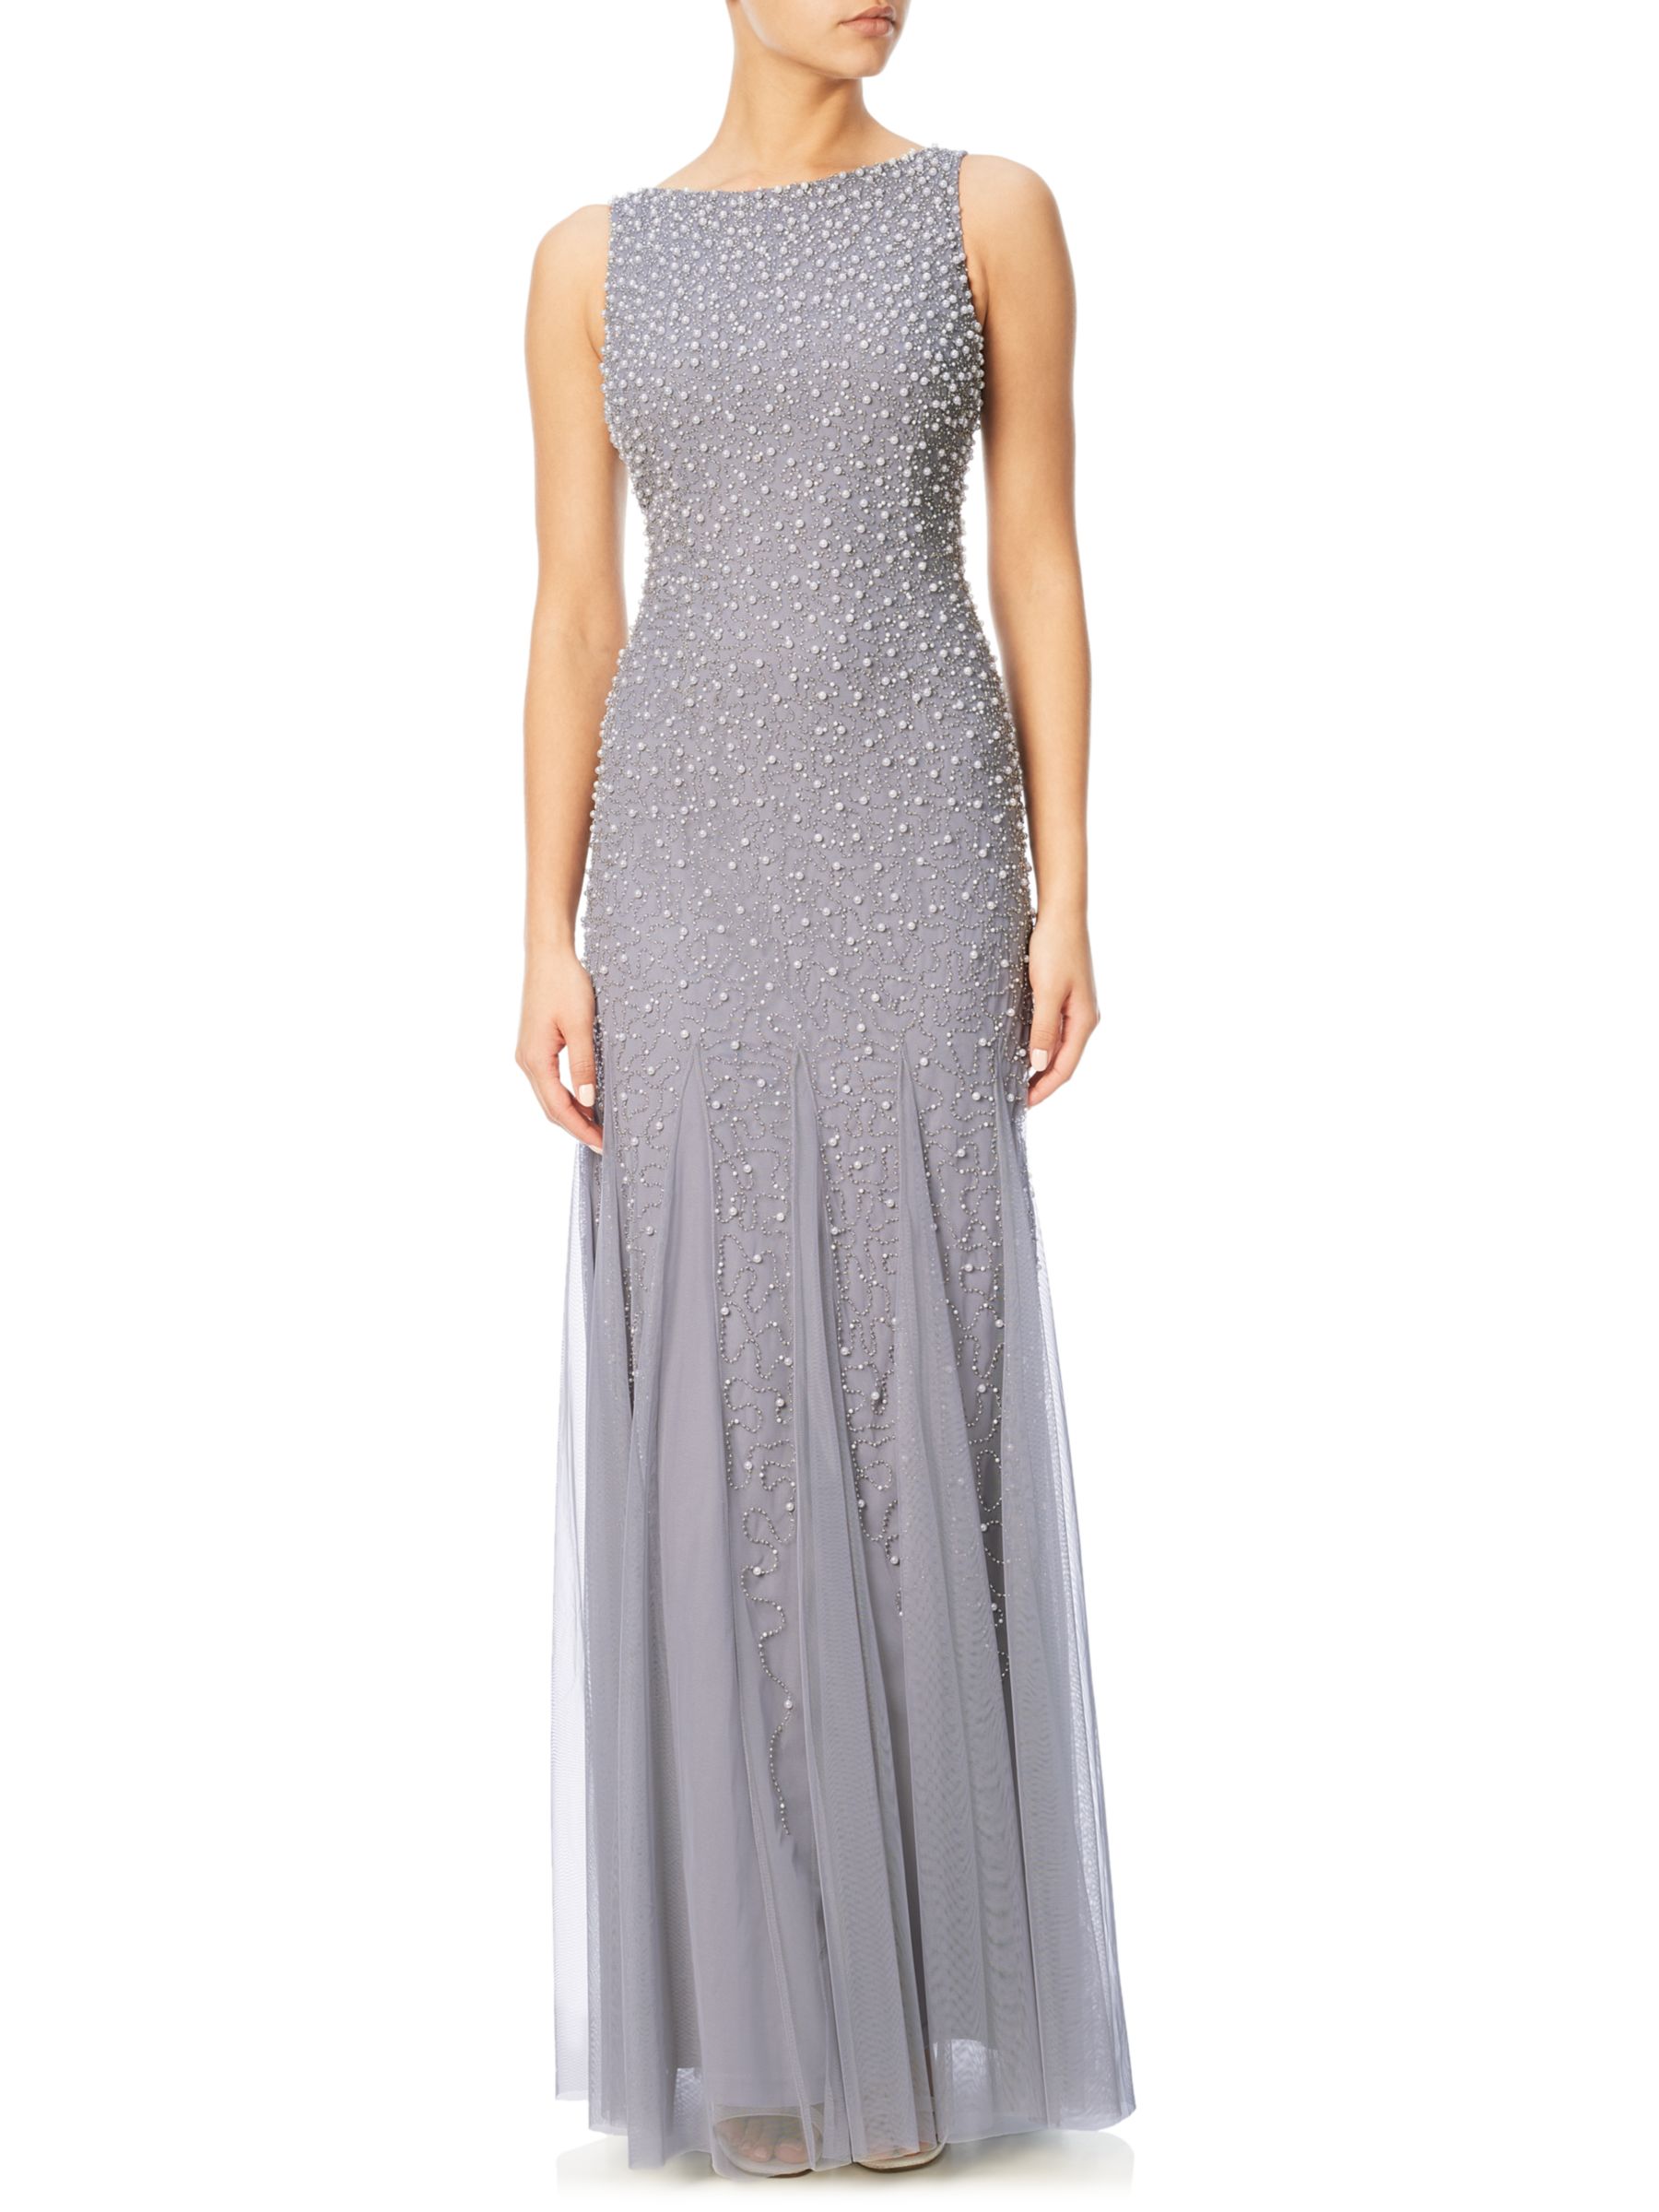 Adrianna Papell Boat Neck Gown, Silver Grey at John Lewis & Partners